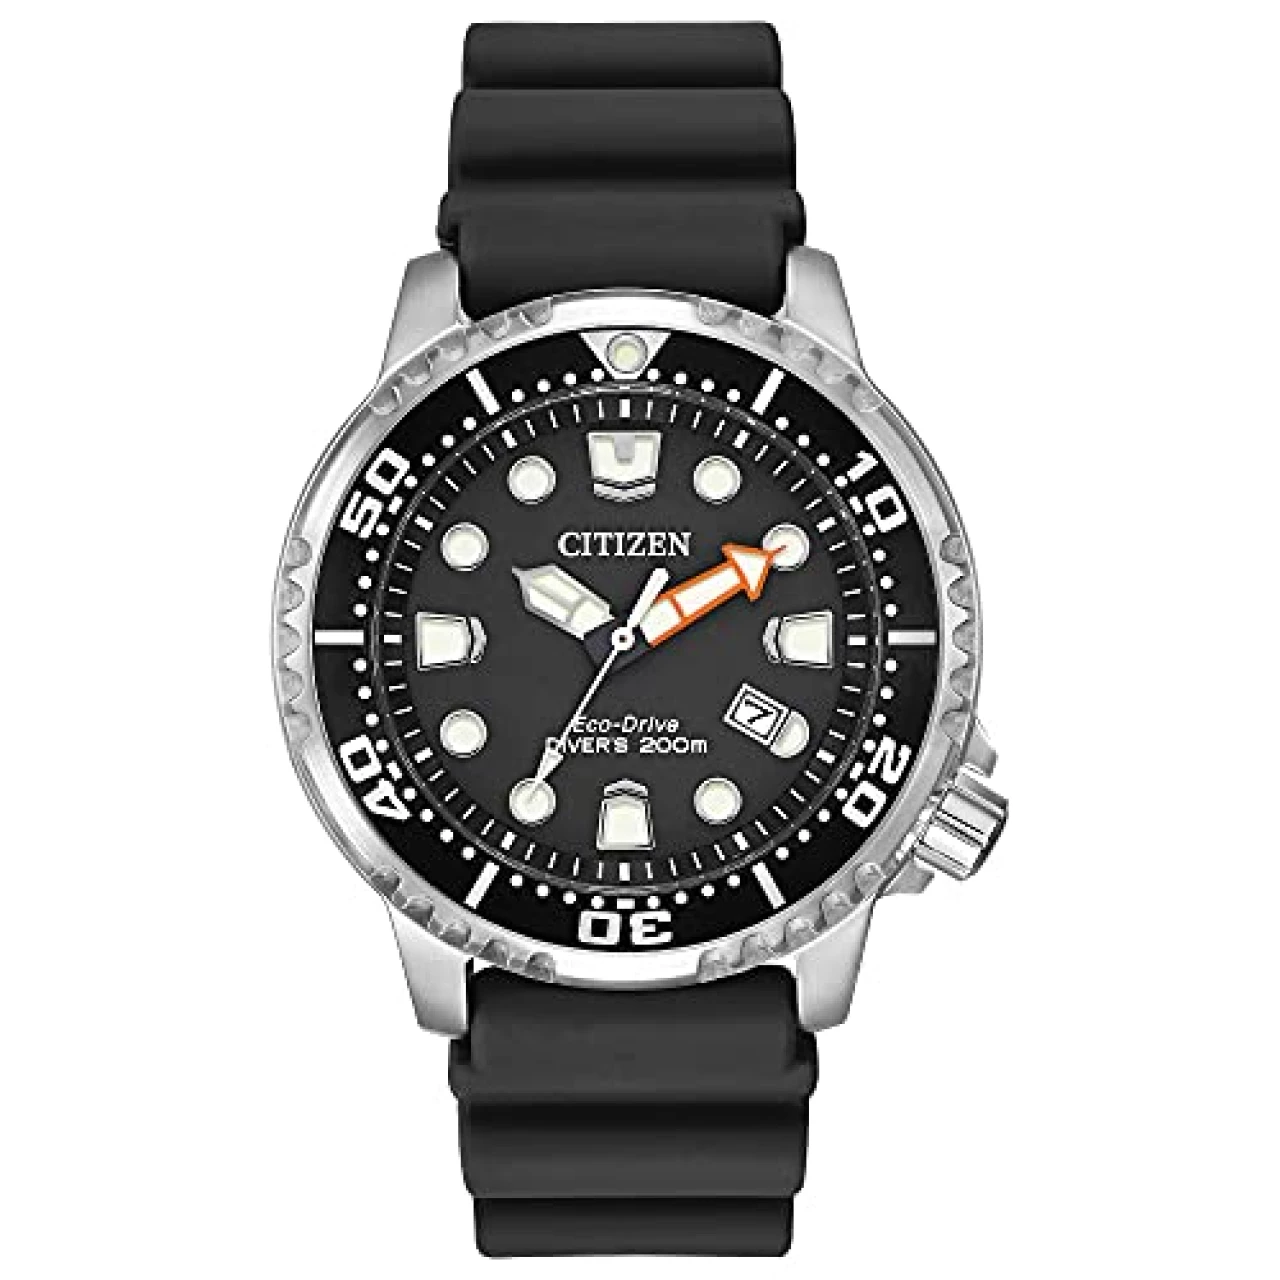 Citizen Promaster Dive Eco-Drive Watch, 3-Hand Date, ISO Certified, Luminous Hands and Markers, Rotating Bezel, Black/Stainless (Model: BN0150-28E)